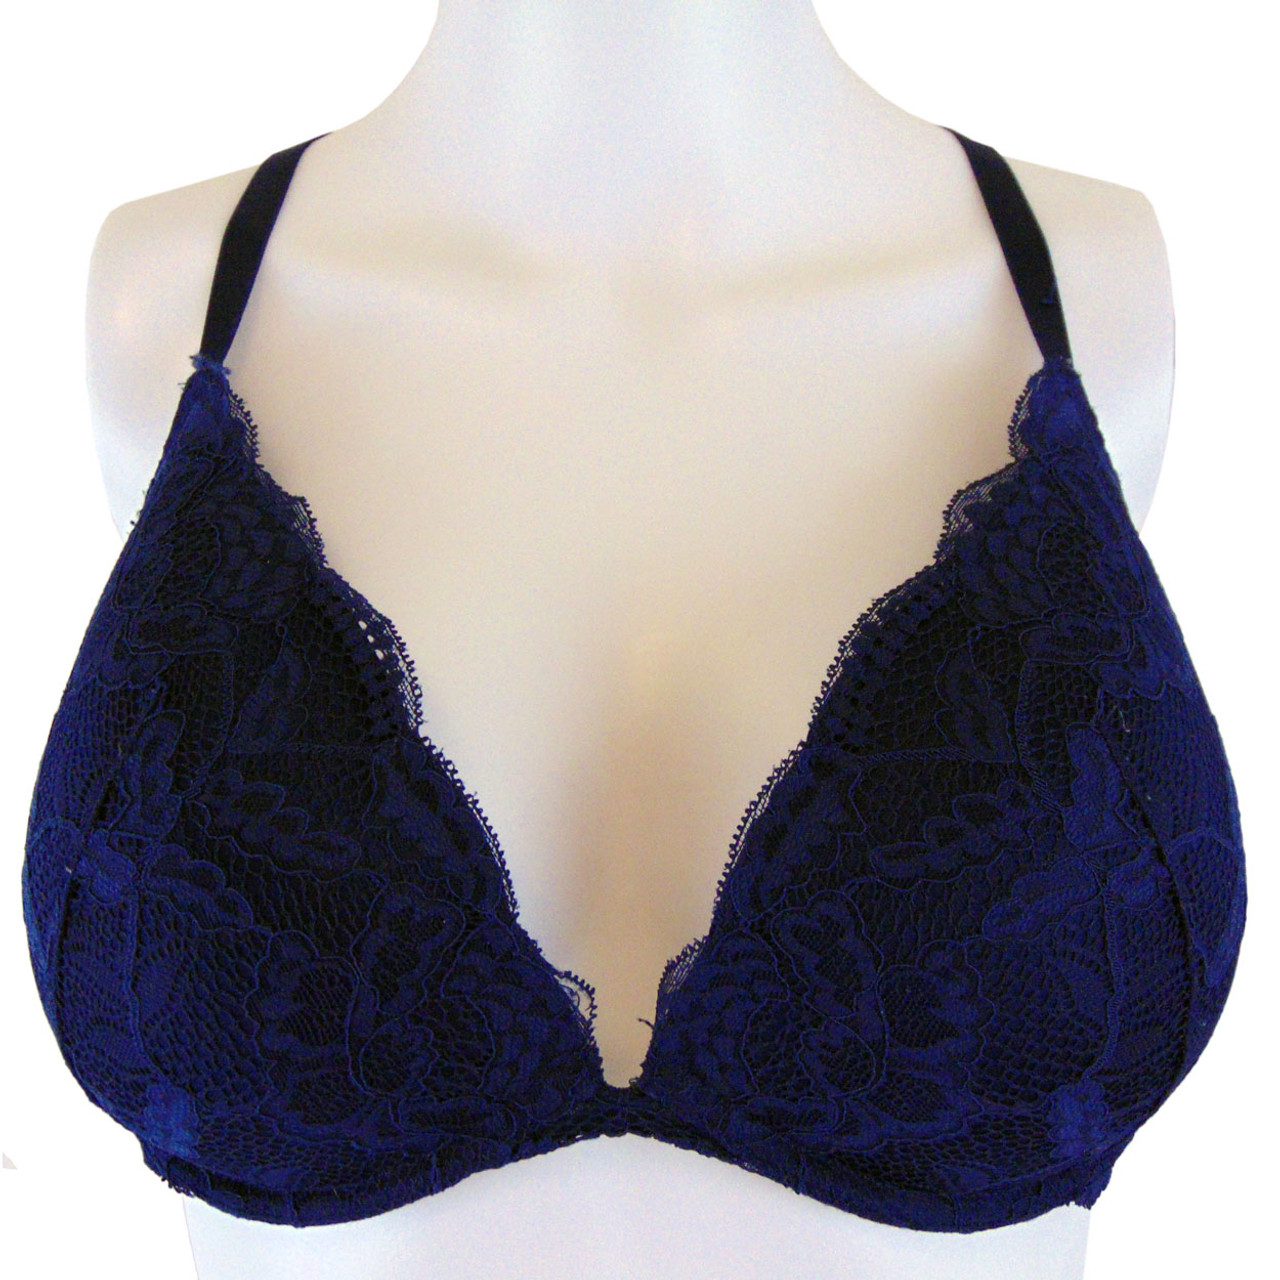 La Senza Obsession Navy Blue Lace Underwire Bra  Onestop-Thriftshop  Consignment and Discount Bouitique